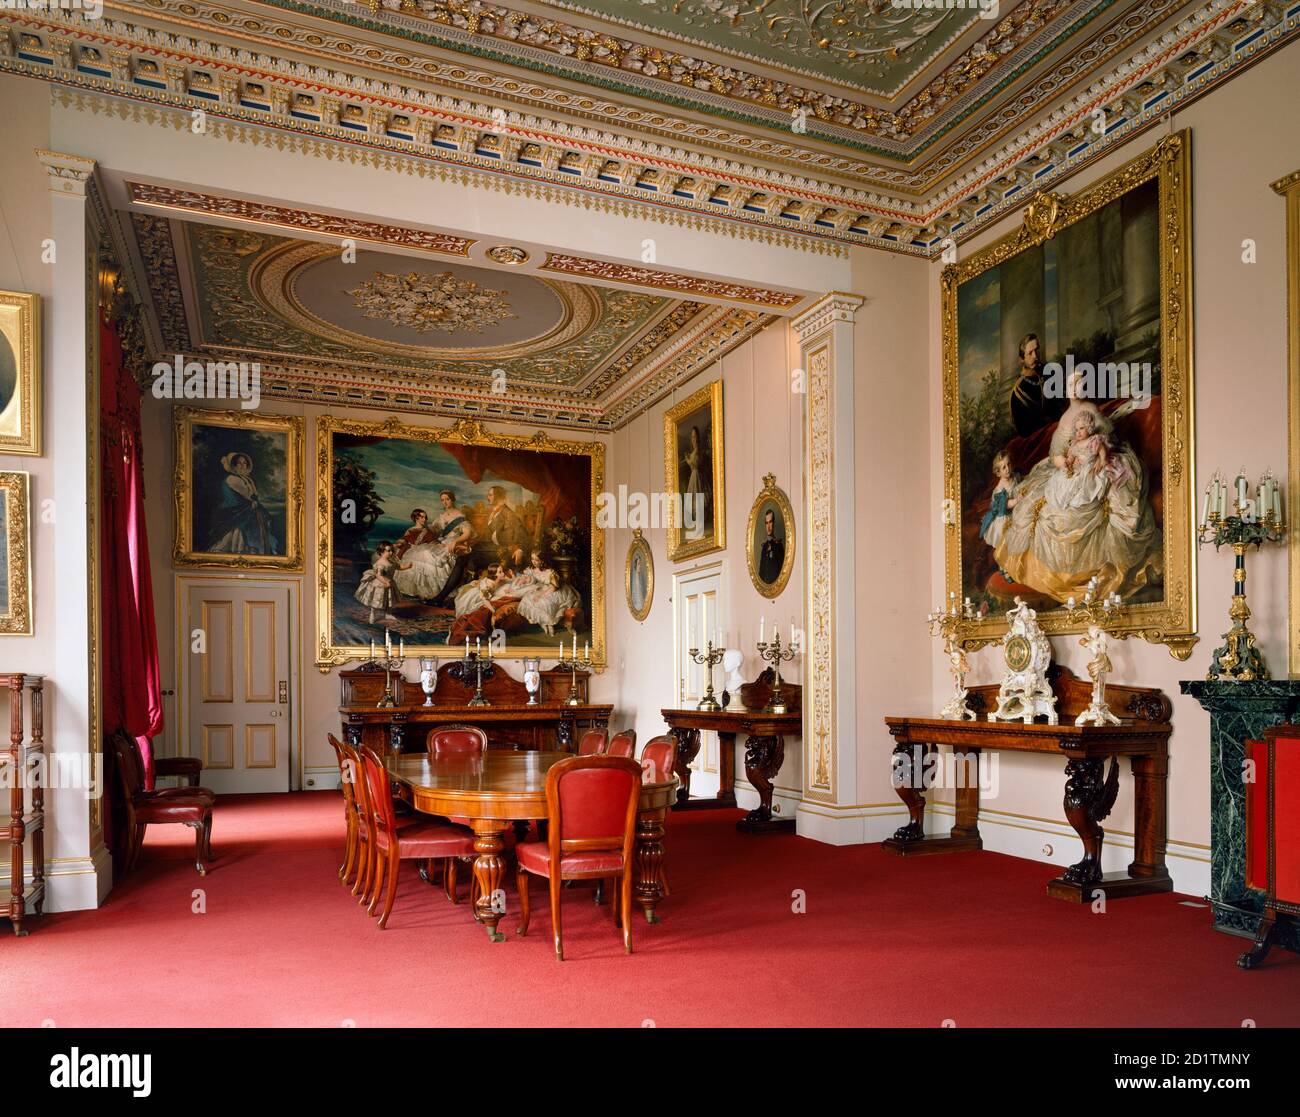 OSBORNE HOUSE, Isle of Wight. Interior view. The Dining Room. Stock Photo